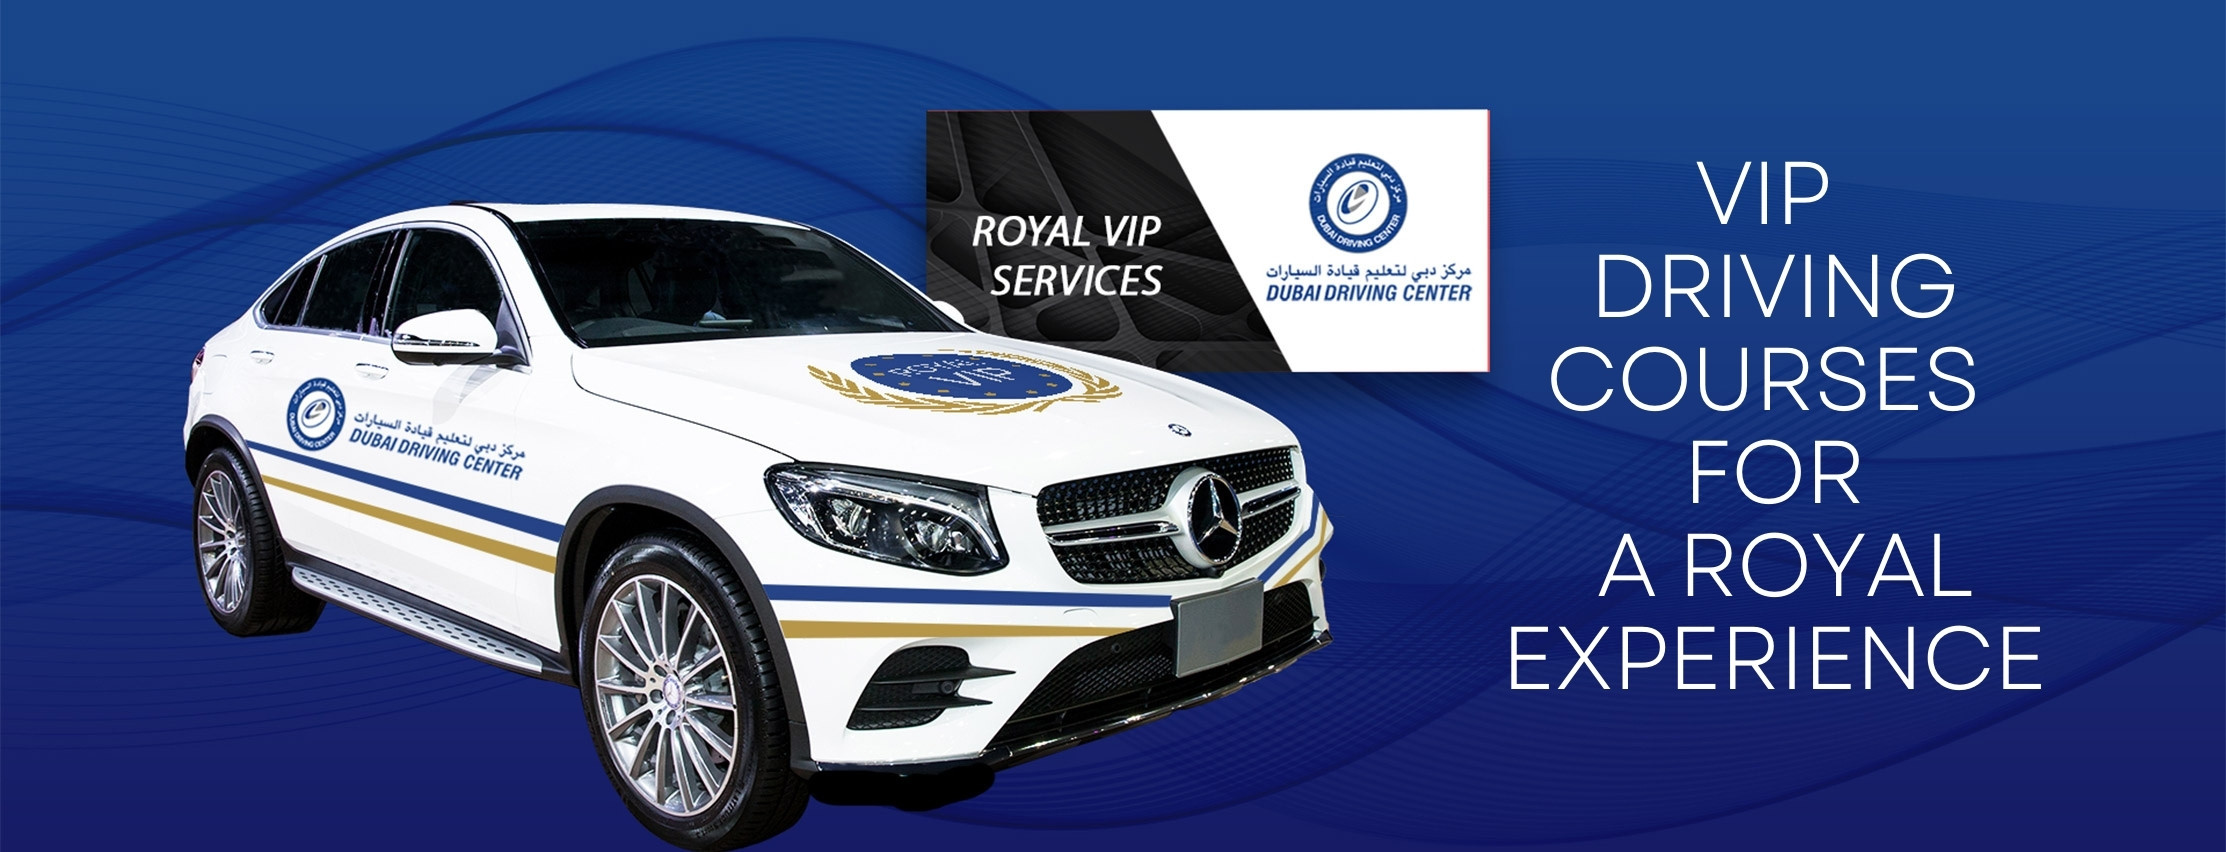 VIP Driving Courses − For a Royal Experience